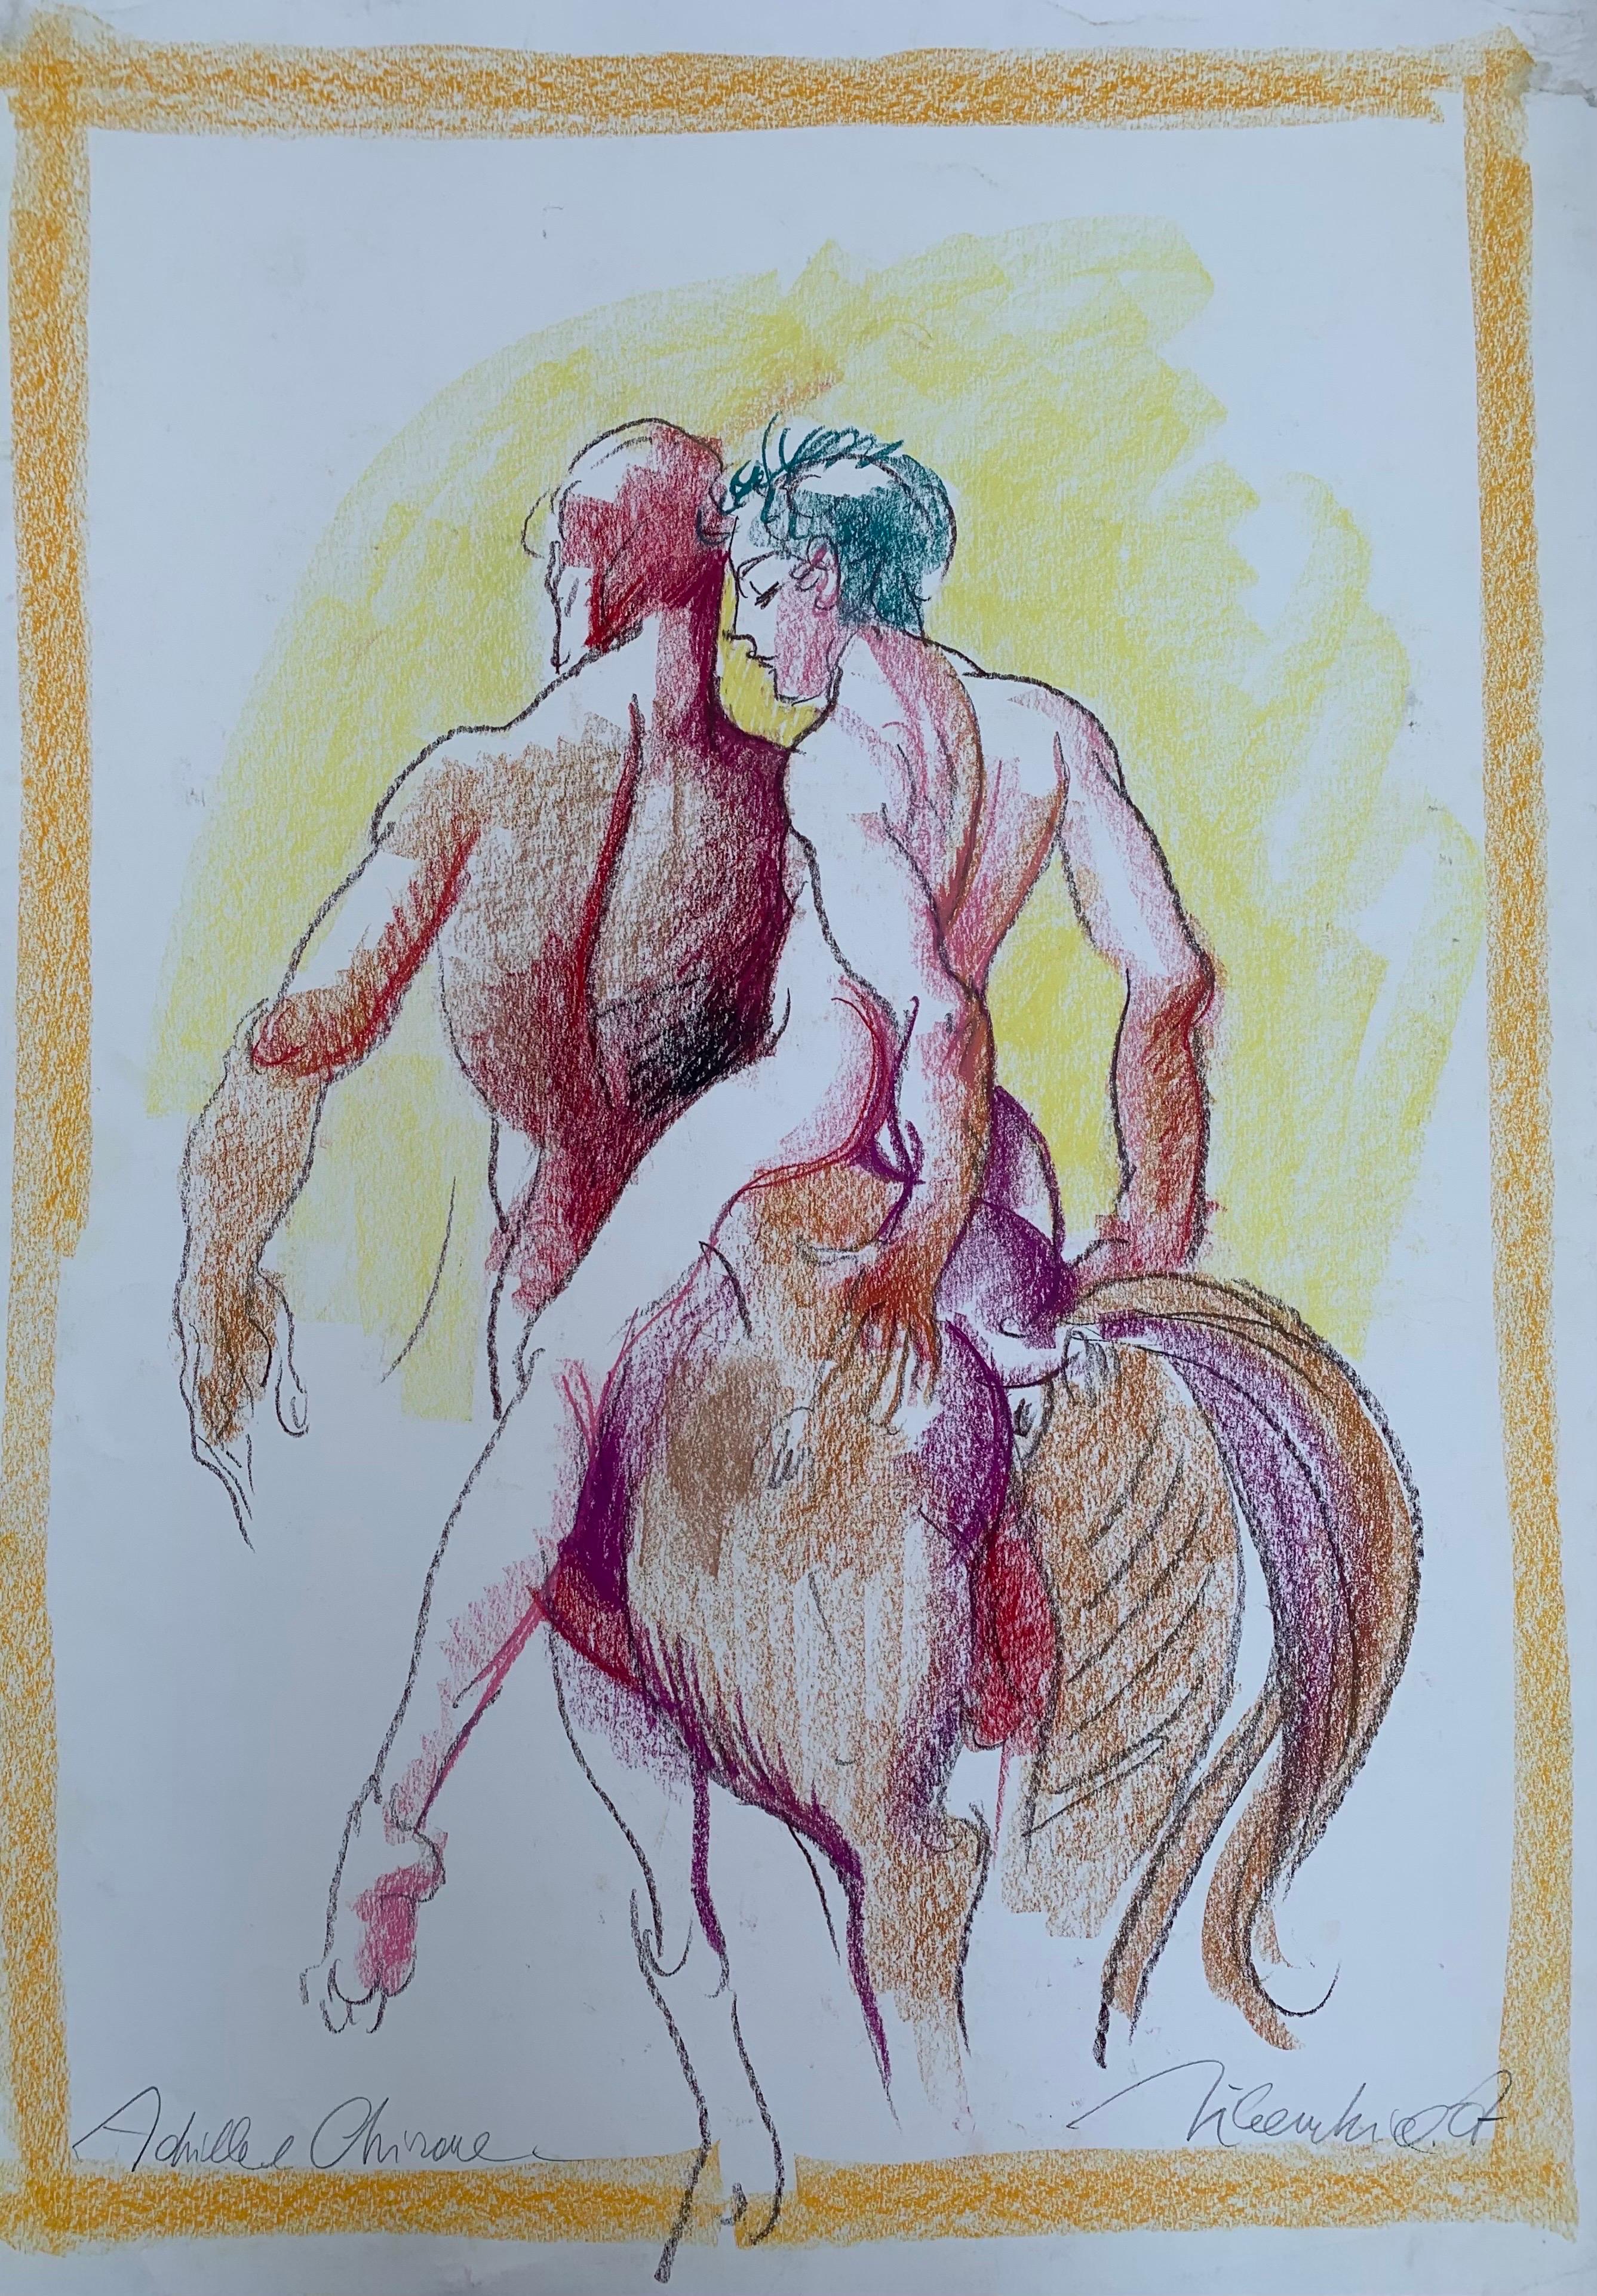 Silombria Marco Nude Painting - Achilles riding the Centaur Chiron by Marco Silombria. Signed by artist. 